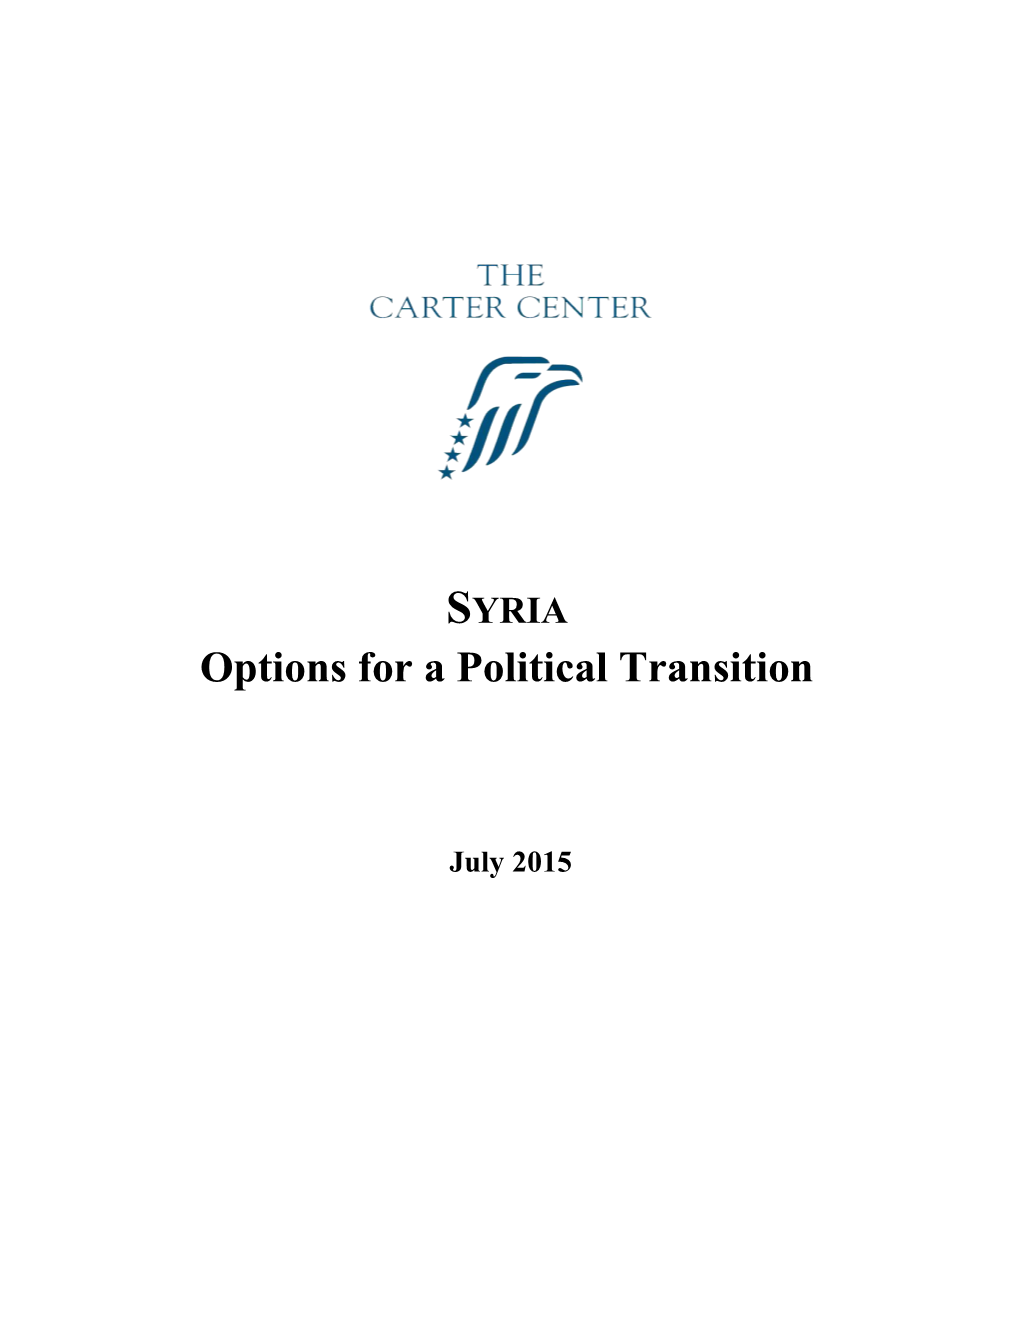 Options for a Political Transition in Syria